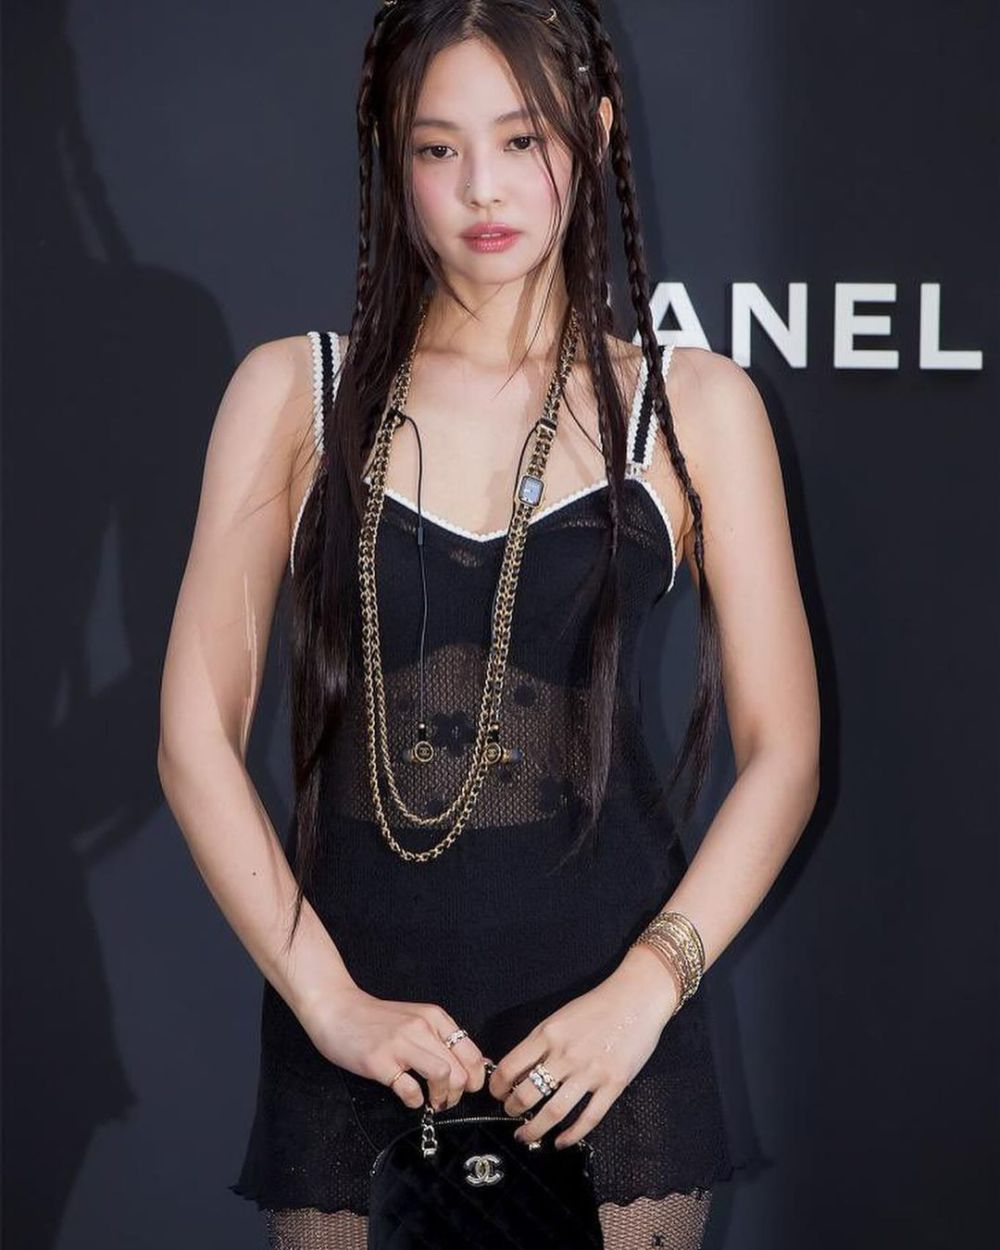 Portrait Of Jennie Blackpink At The Coco Crush Chanel Pop-Up Event